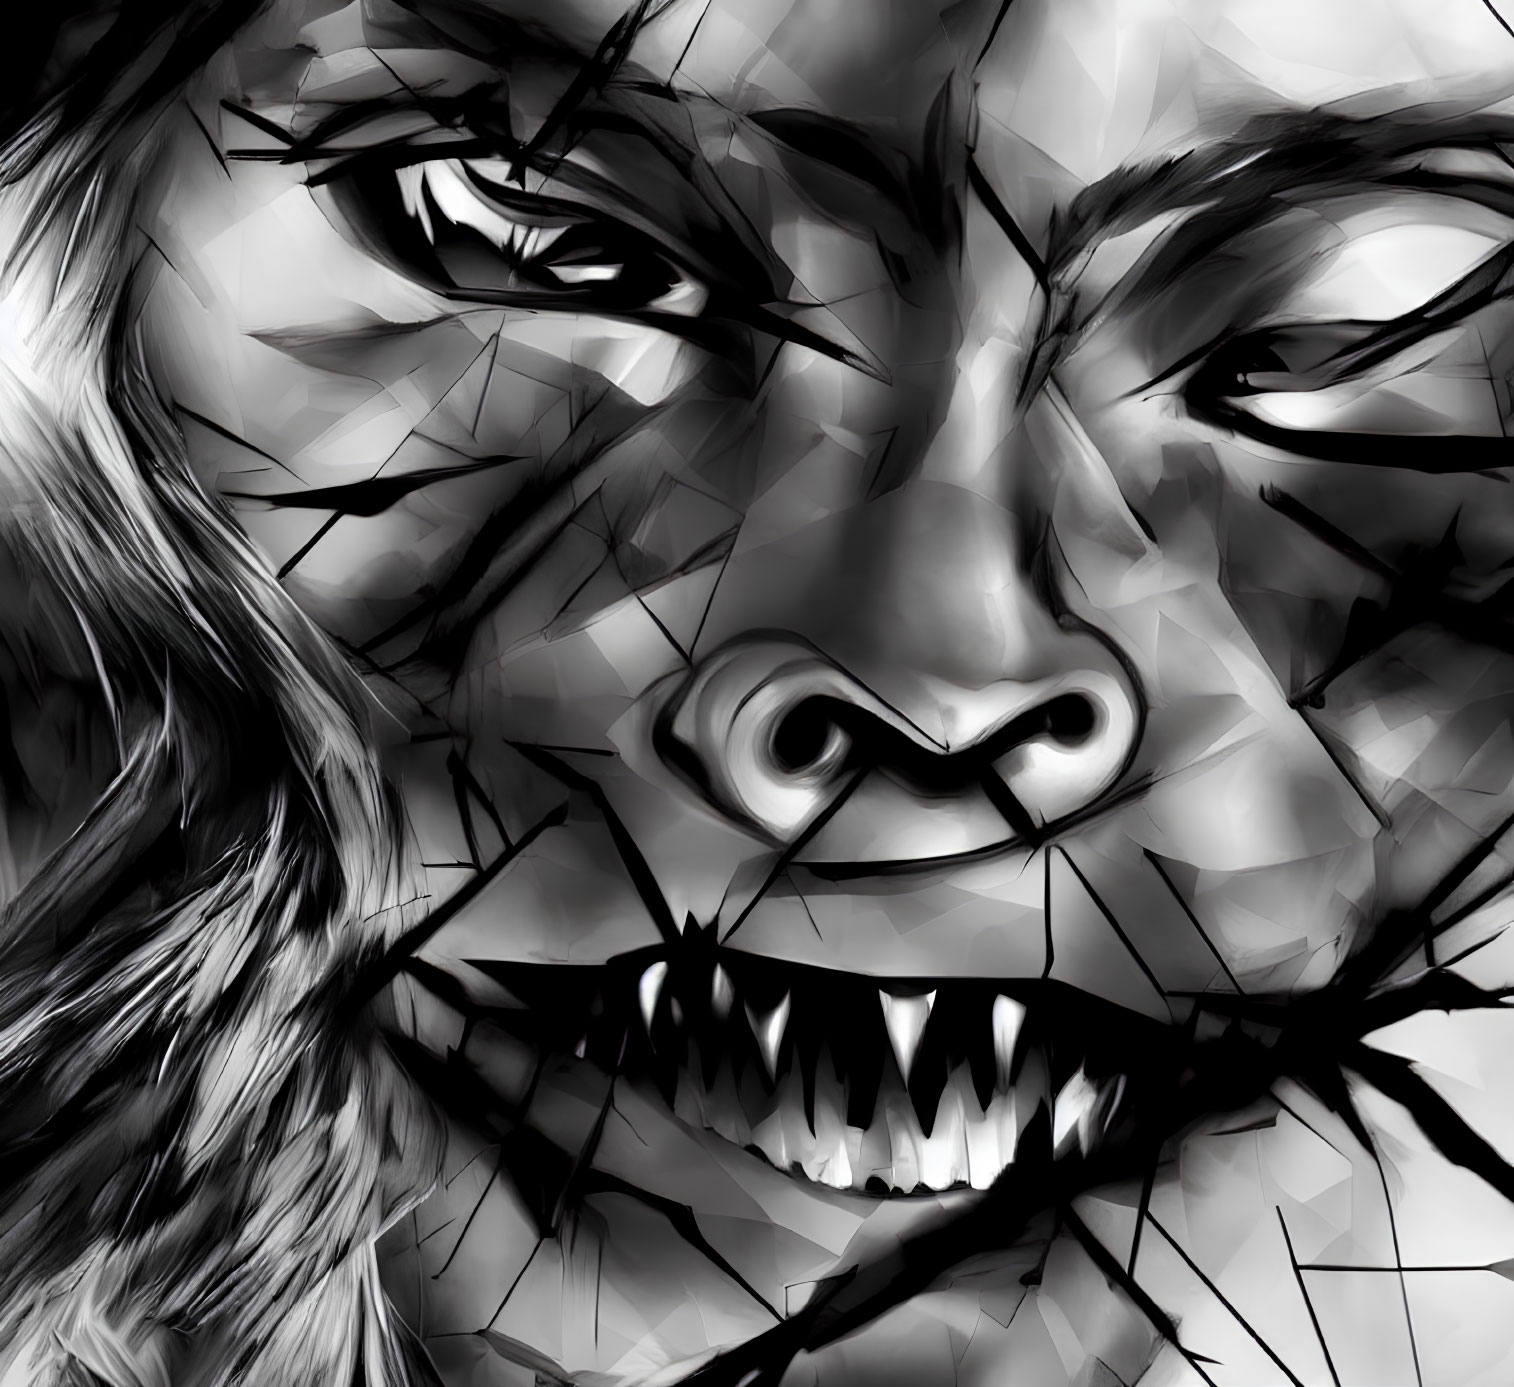 Dramatic monochromatic close-up of intense snarling face